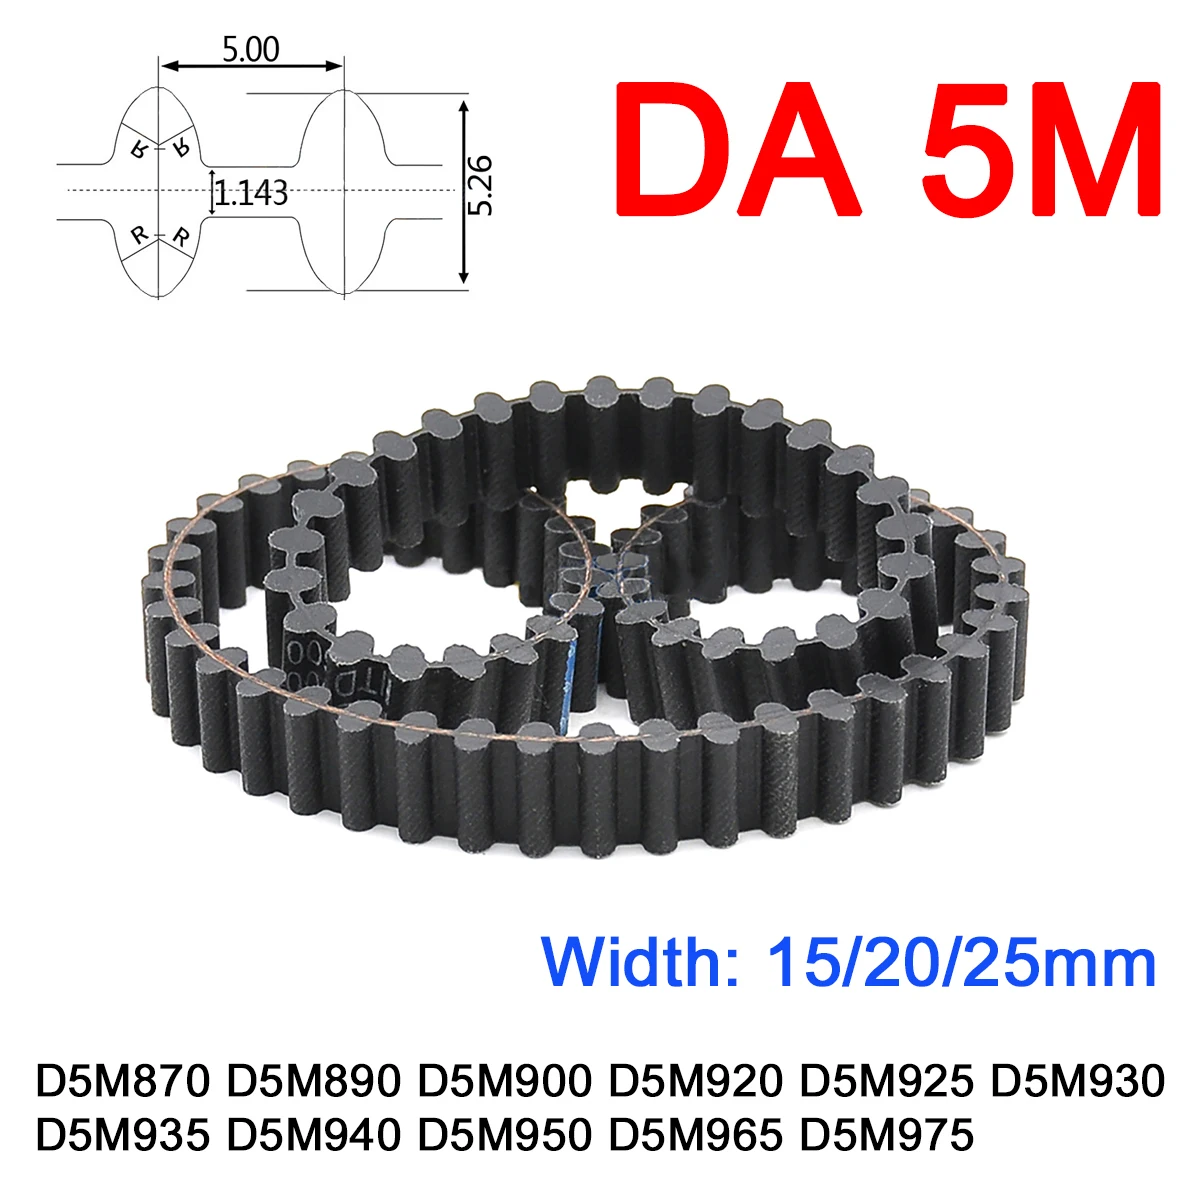 

1Pc Width 15mm 20mm 25mm DA-5M Rubber Arc/Trapezoid Tooth Double Side Timing Belt Pitch Length 870 - 975mm Double-sided Toothed